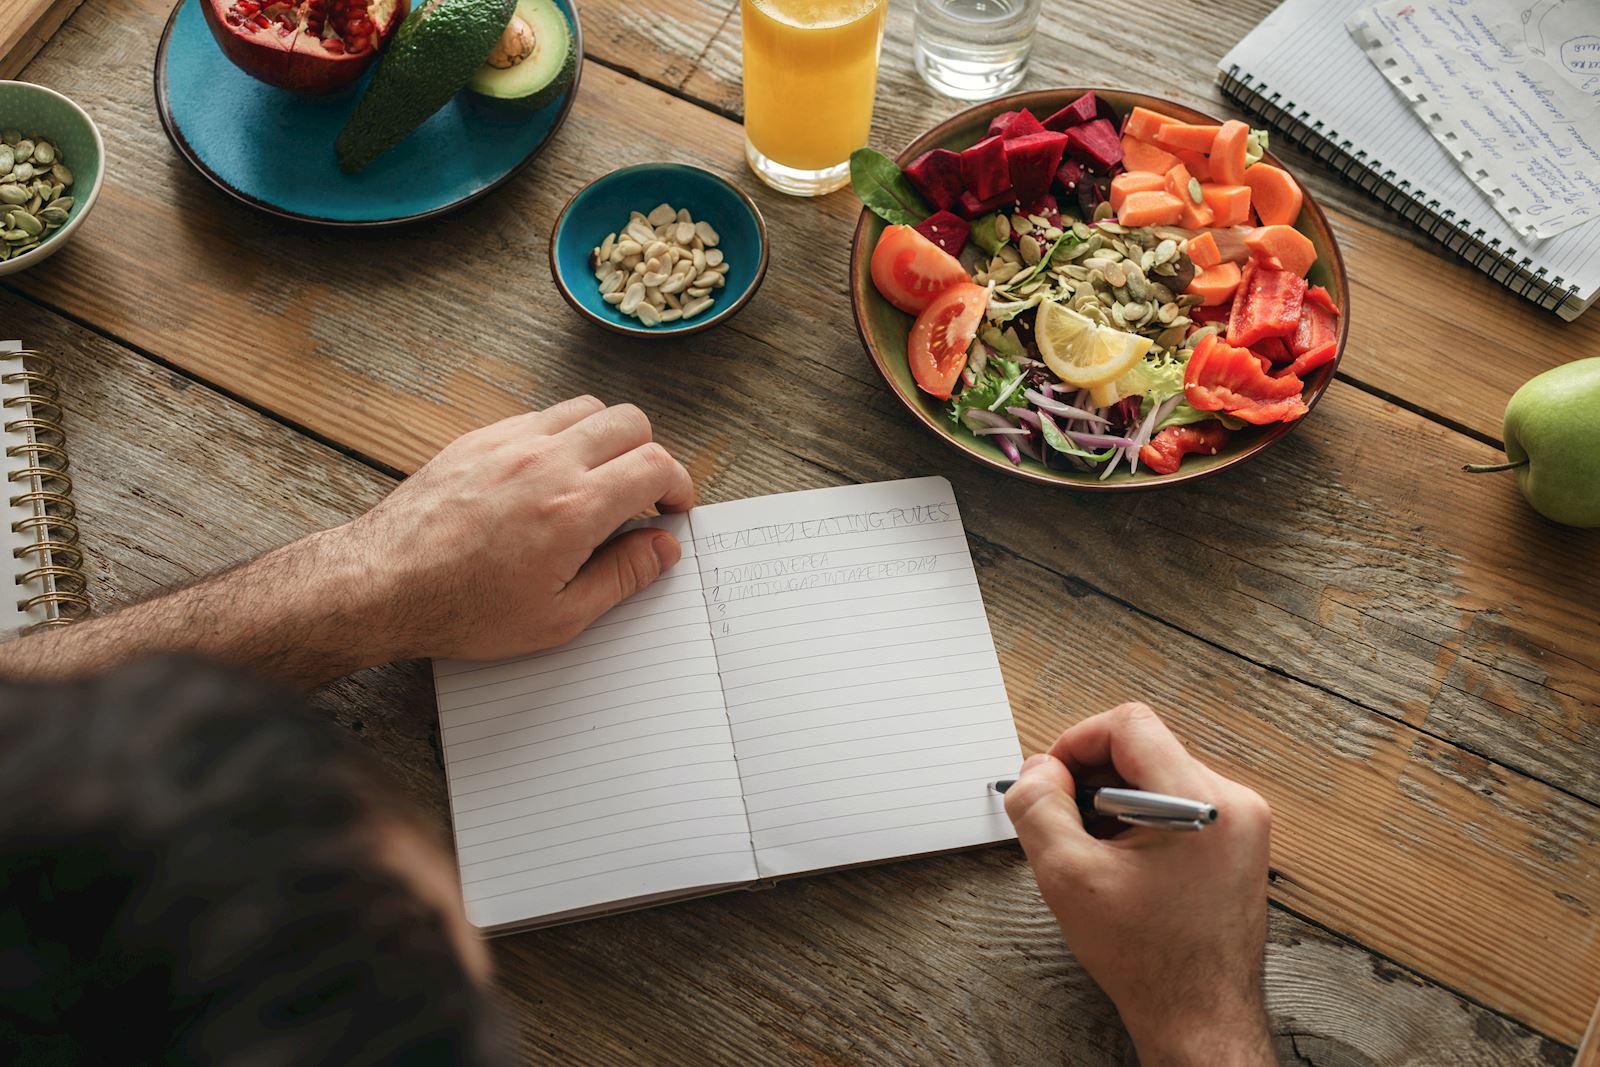 Keeping your New Year's nutrition resolutions